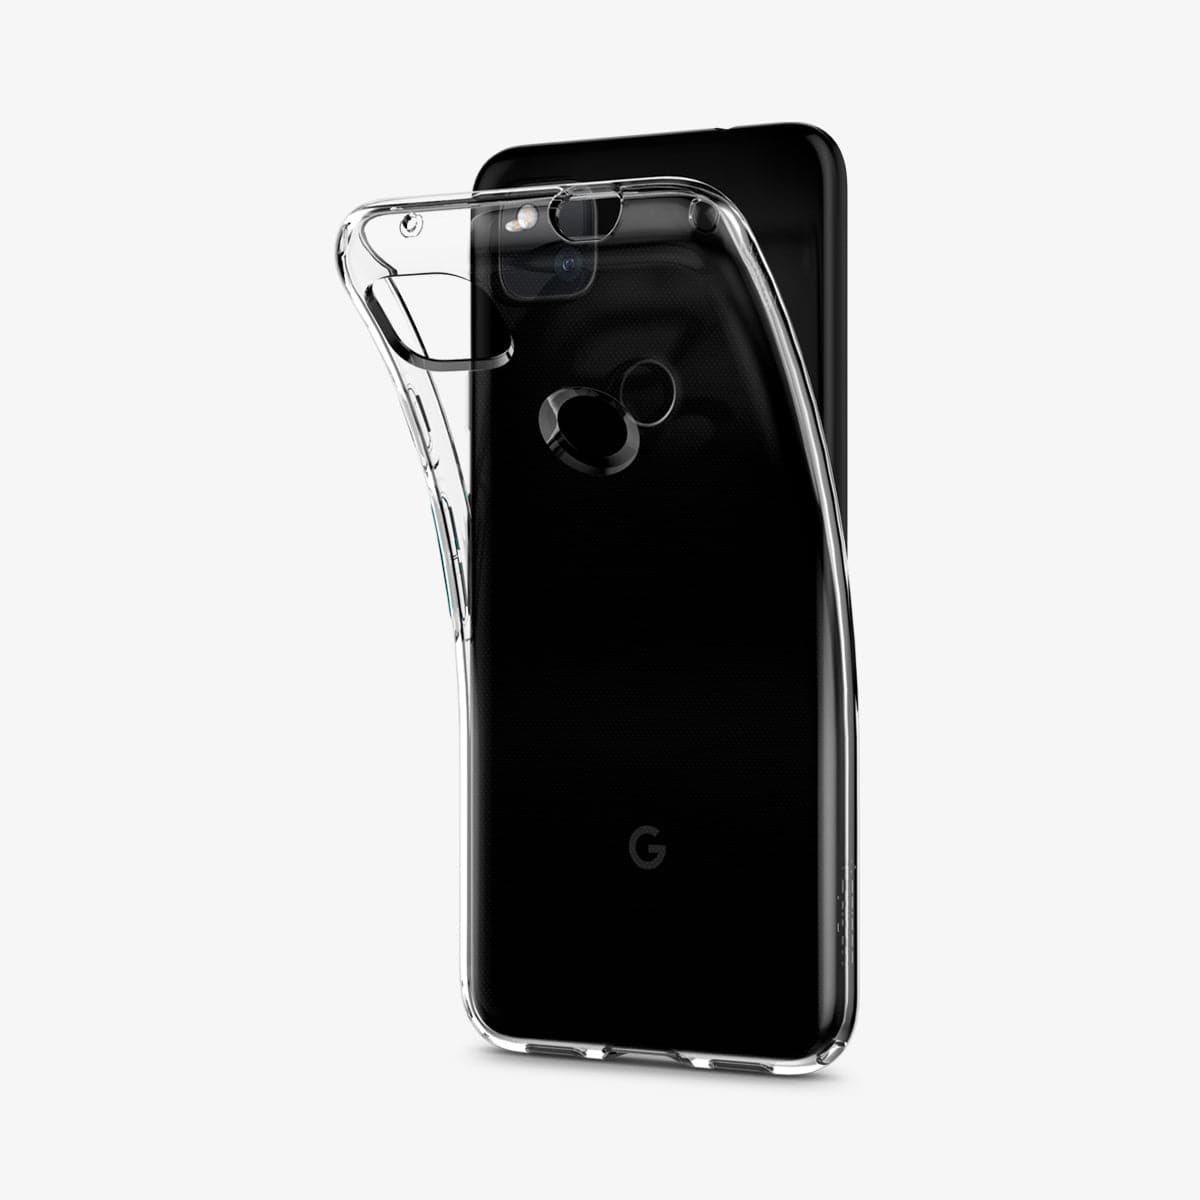 ACS01011 - Pixel 4a Case Liquid Crystal in crystal clear showing the back with case bending away from device to show the flexibility